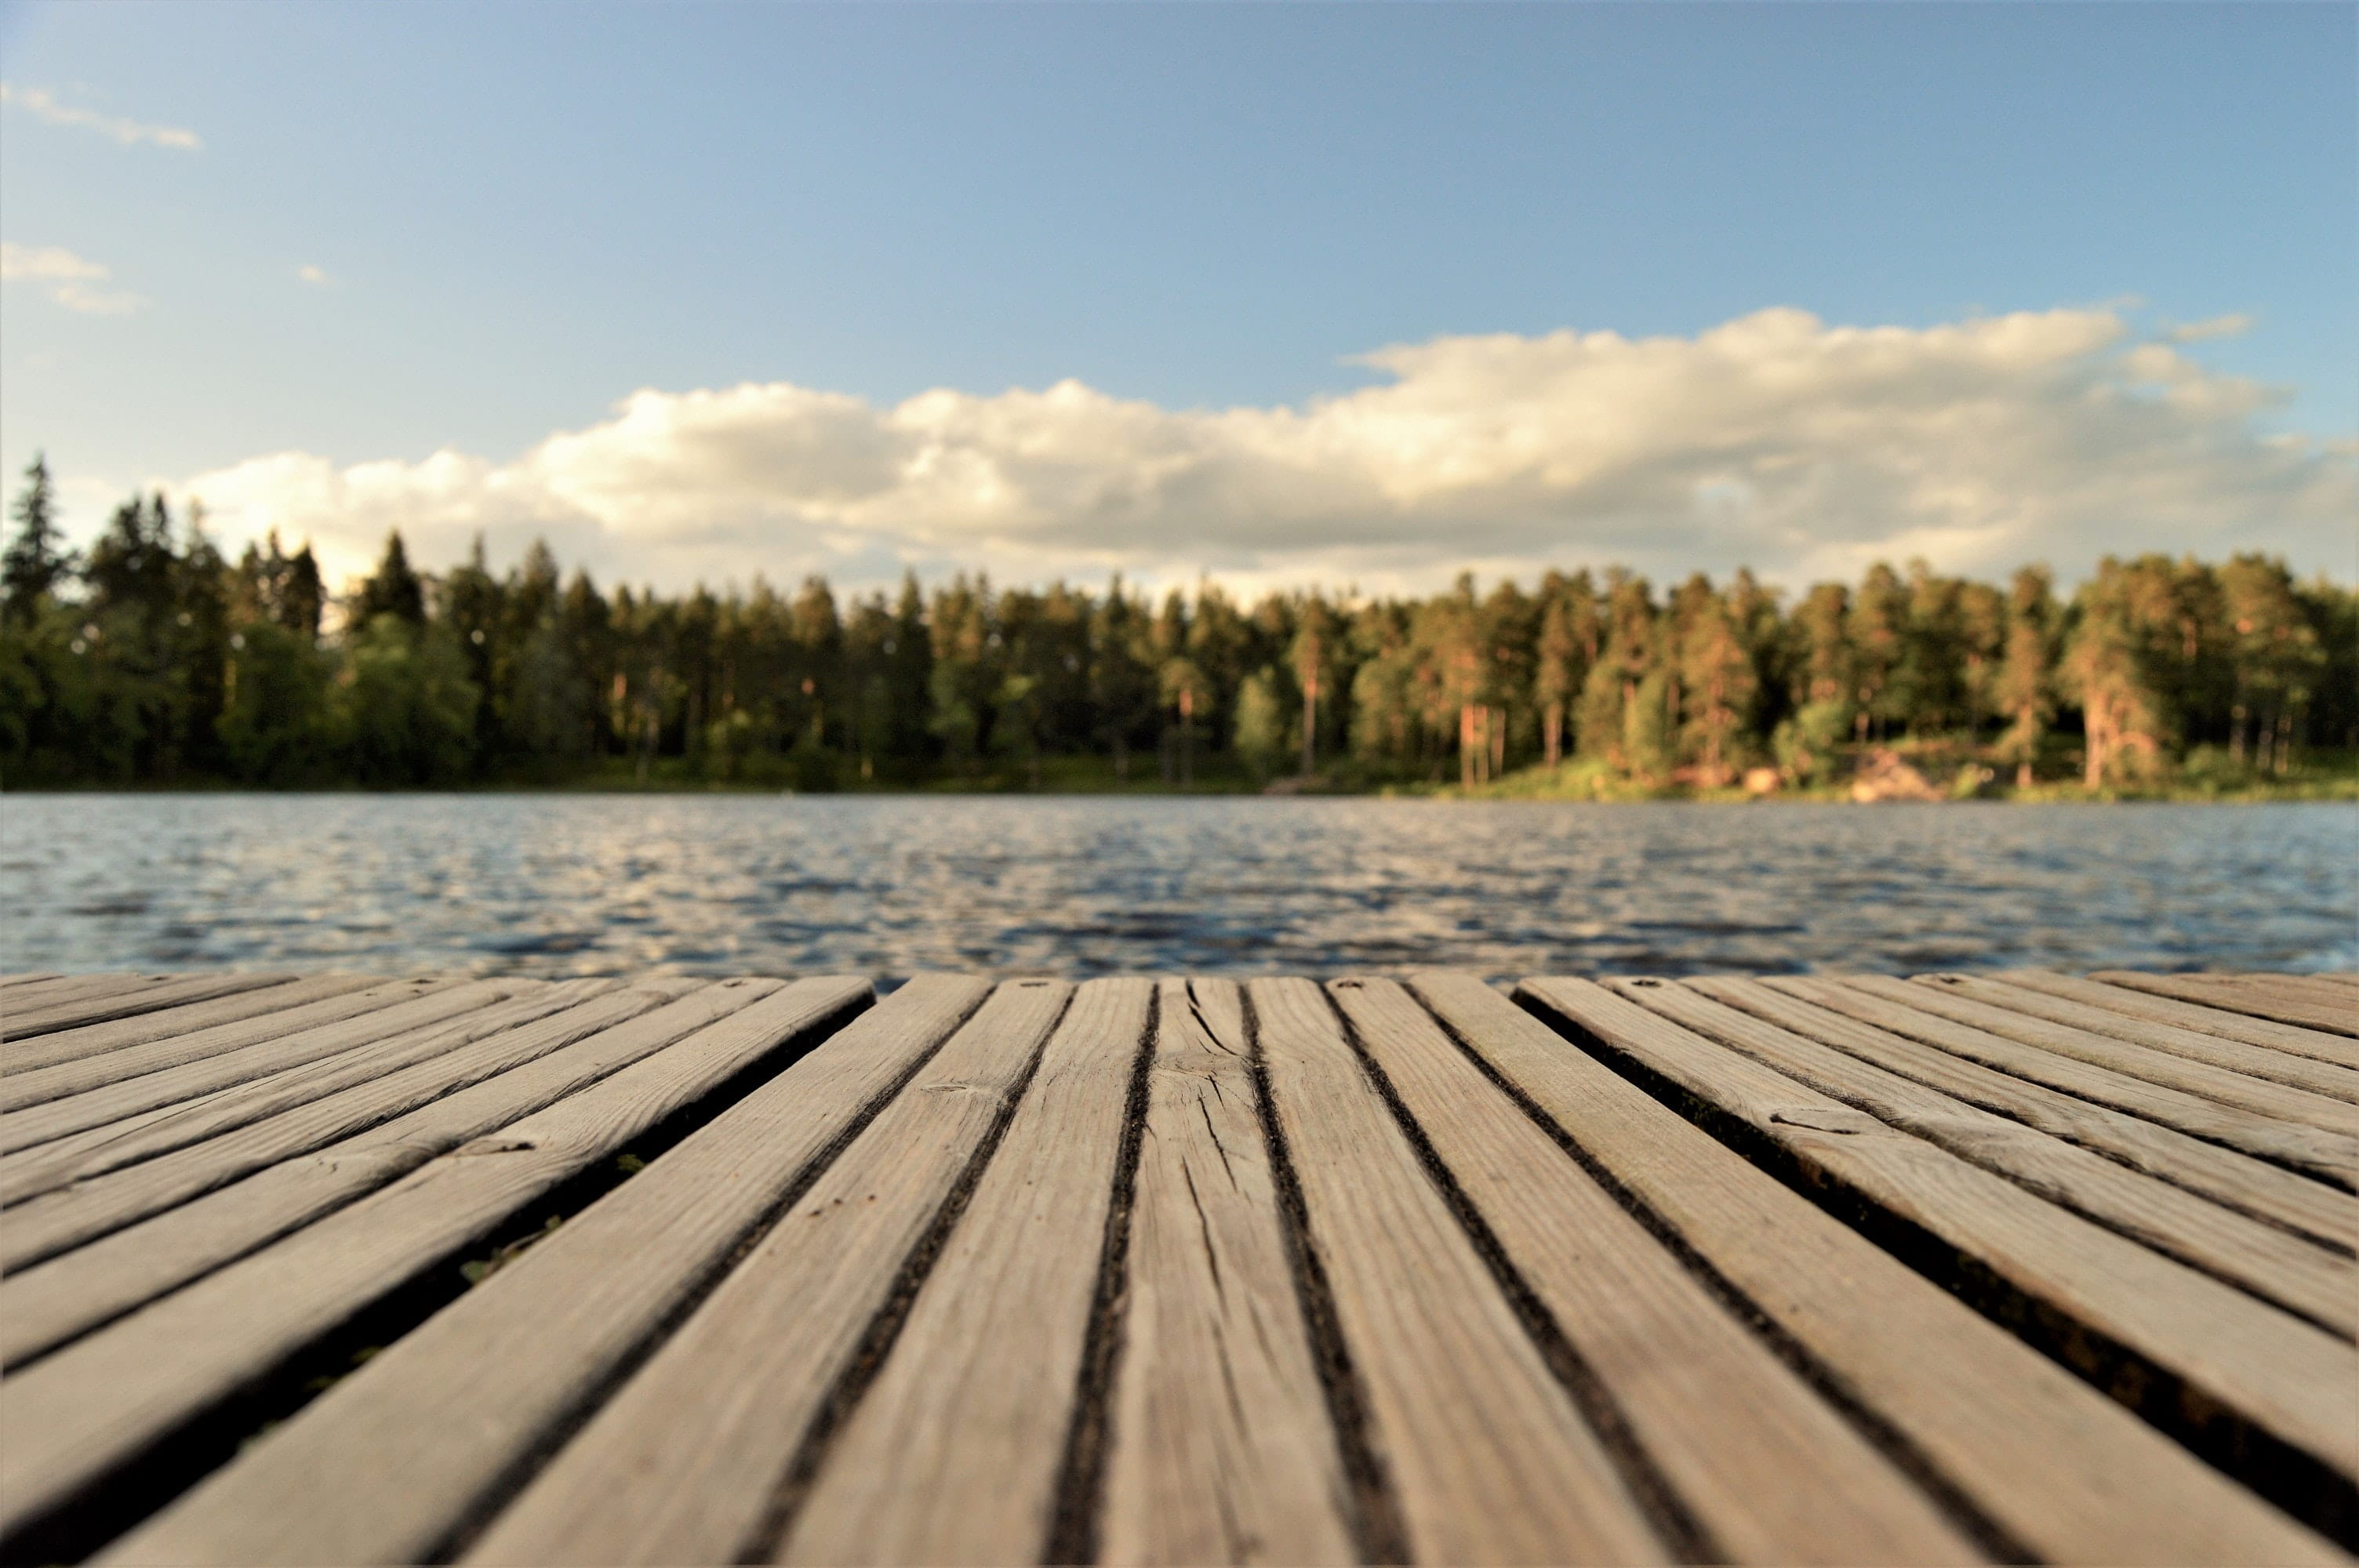 Landscape image of a deck and a lake.